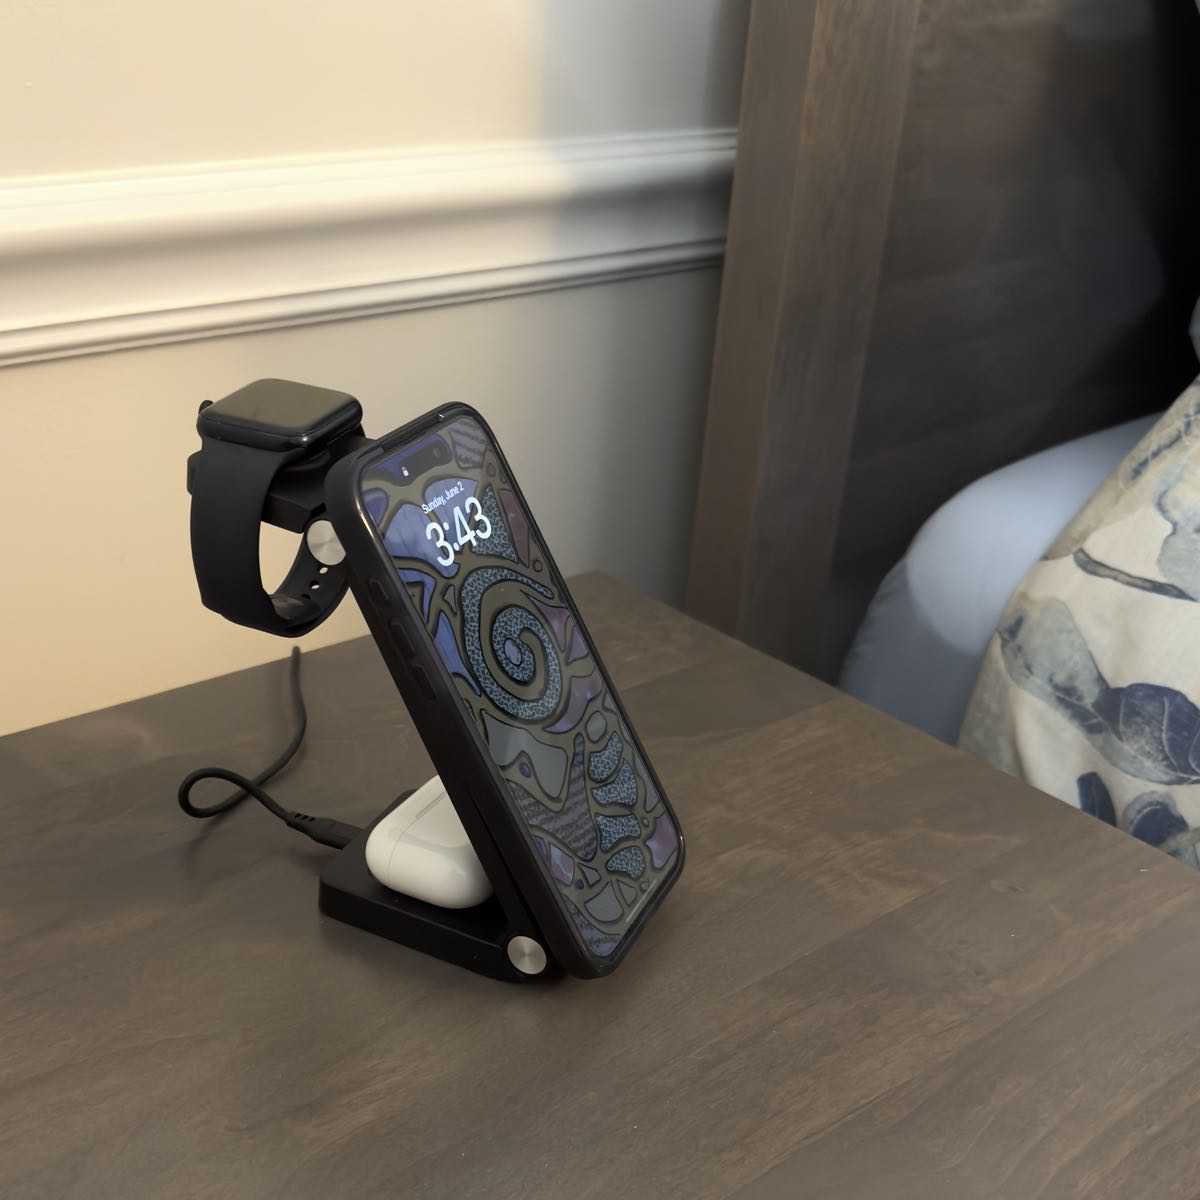 ANNNWZZD 3-in-1 Wireless Charging Station review – charges all your things and is nightstand-friendly